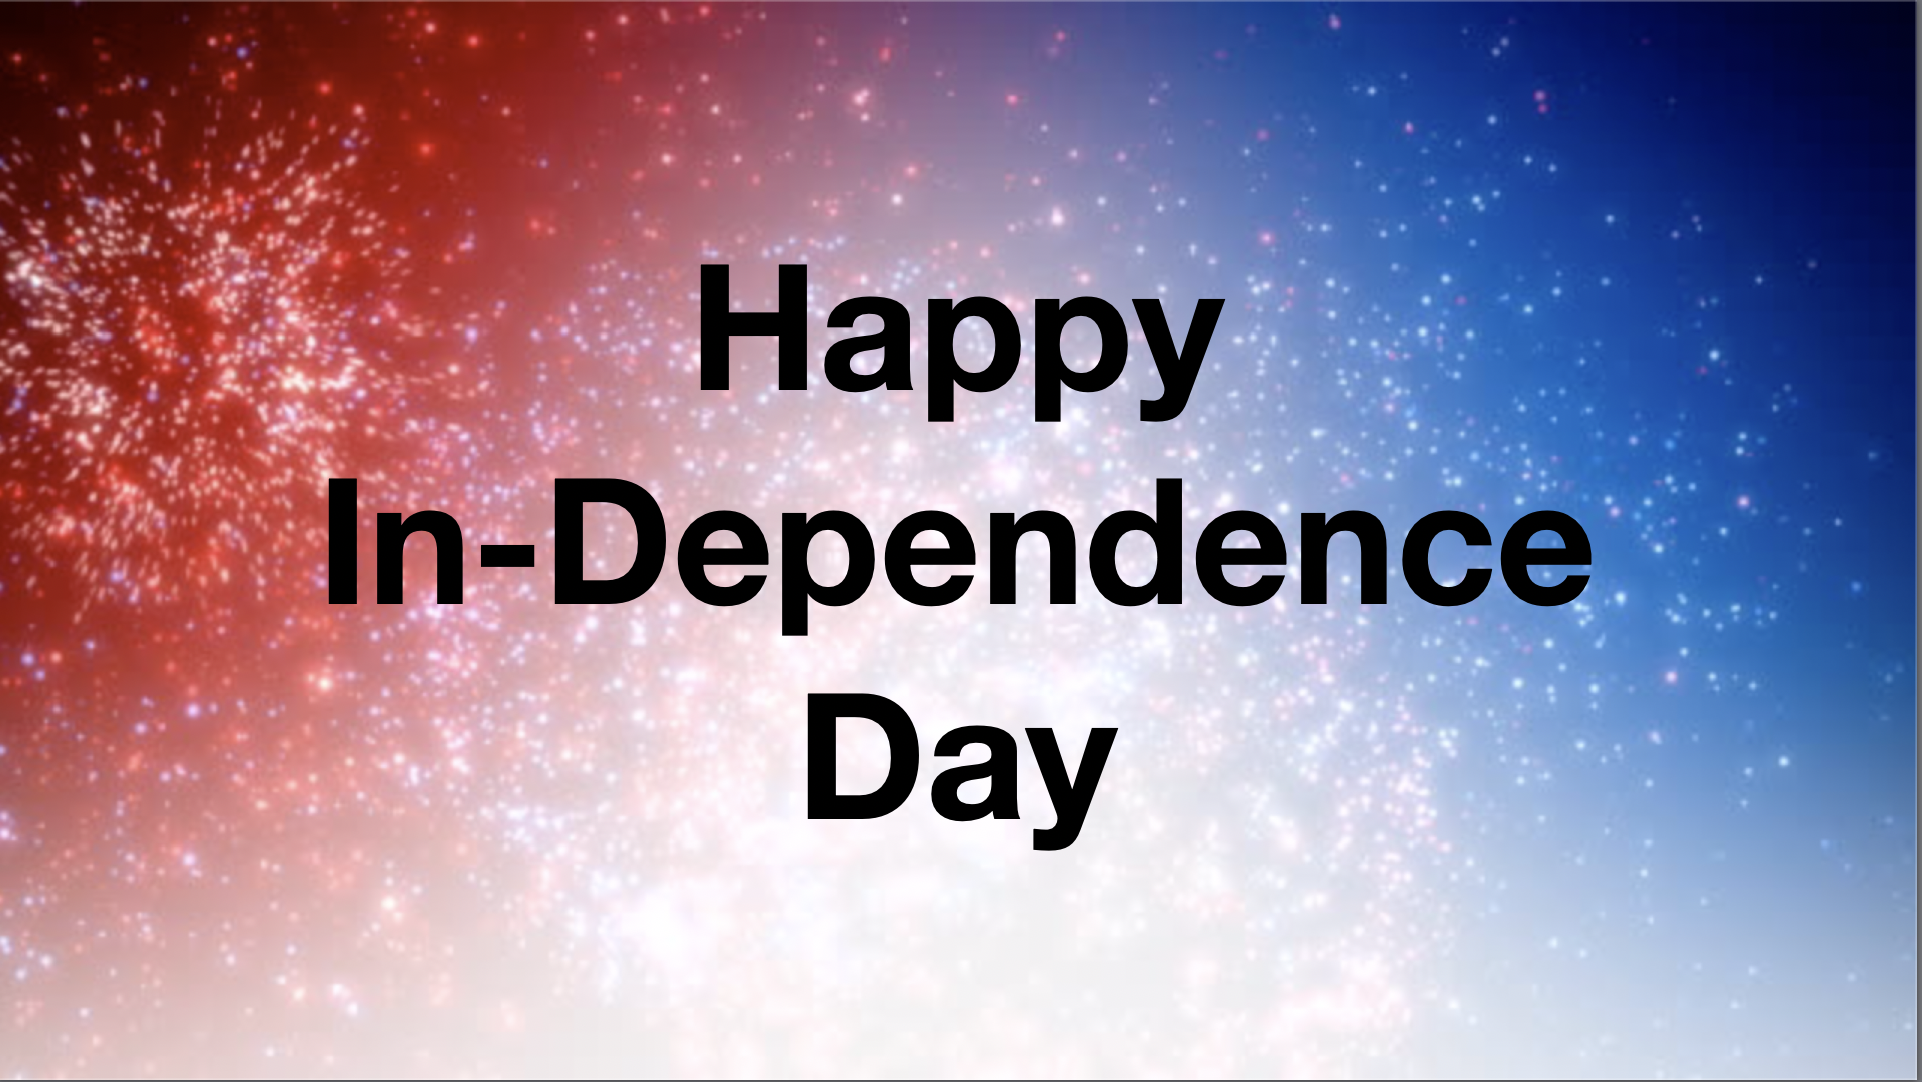 In-Dependence Day by Phil Hoover